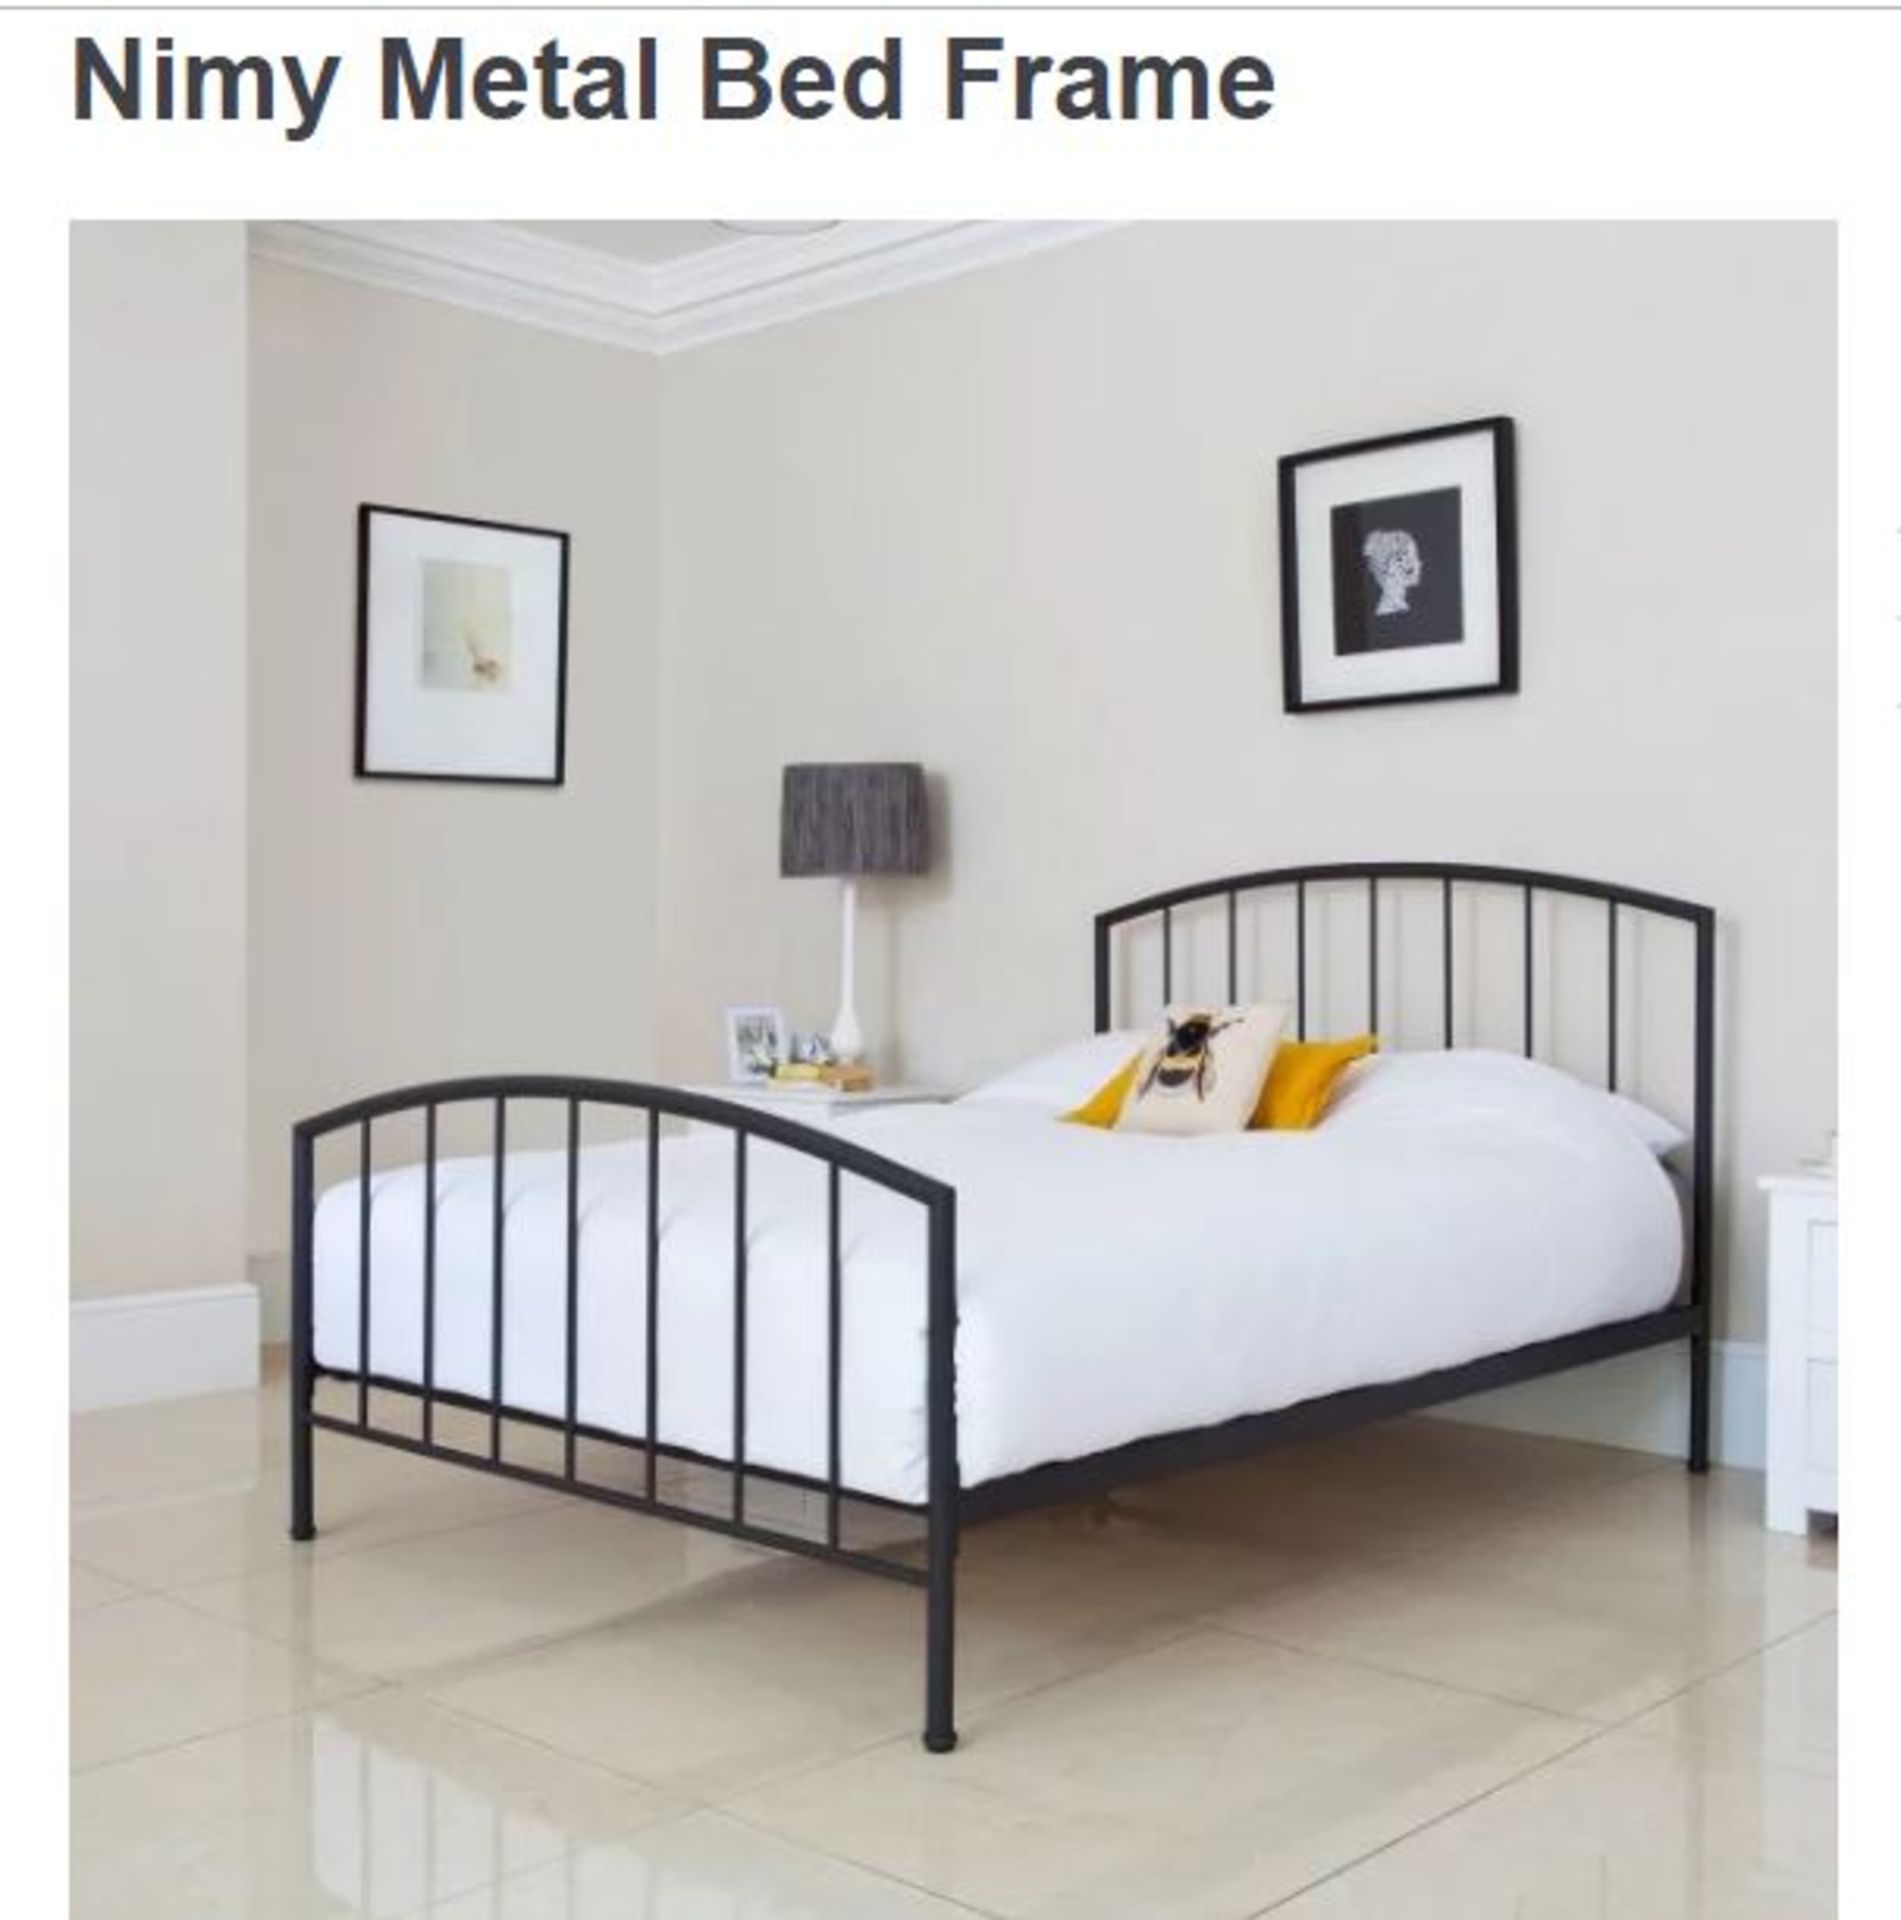 New & Sealed Packaging – Nimy Metal Bed Frame - Items 5 - RRP £345.00